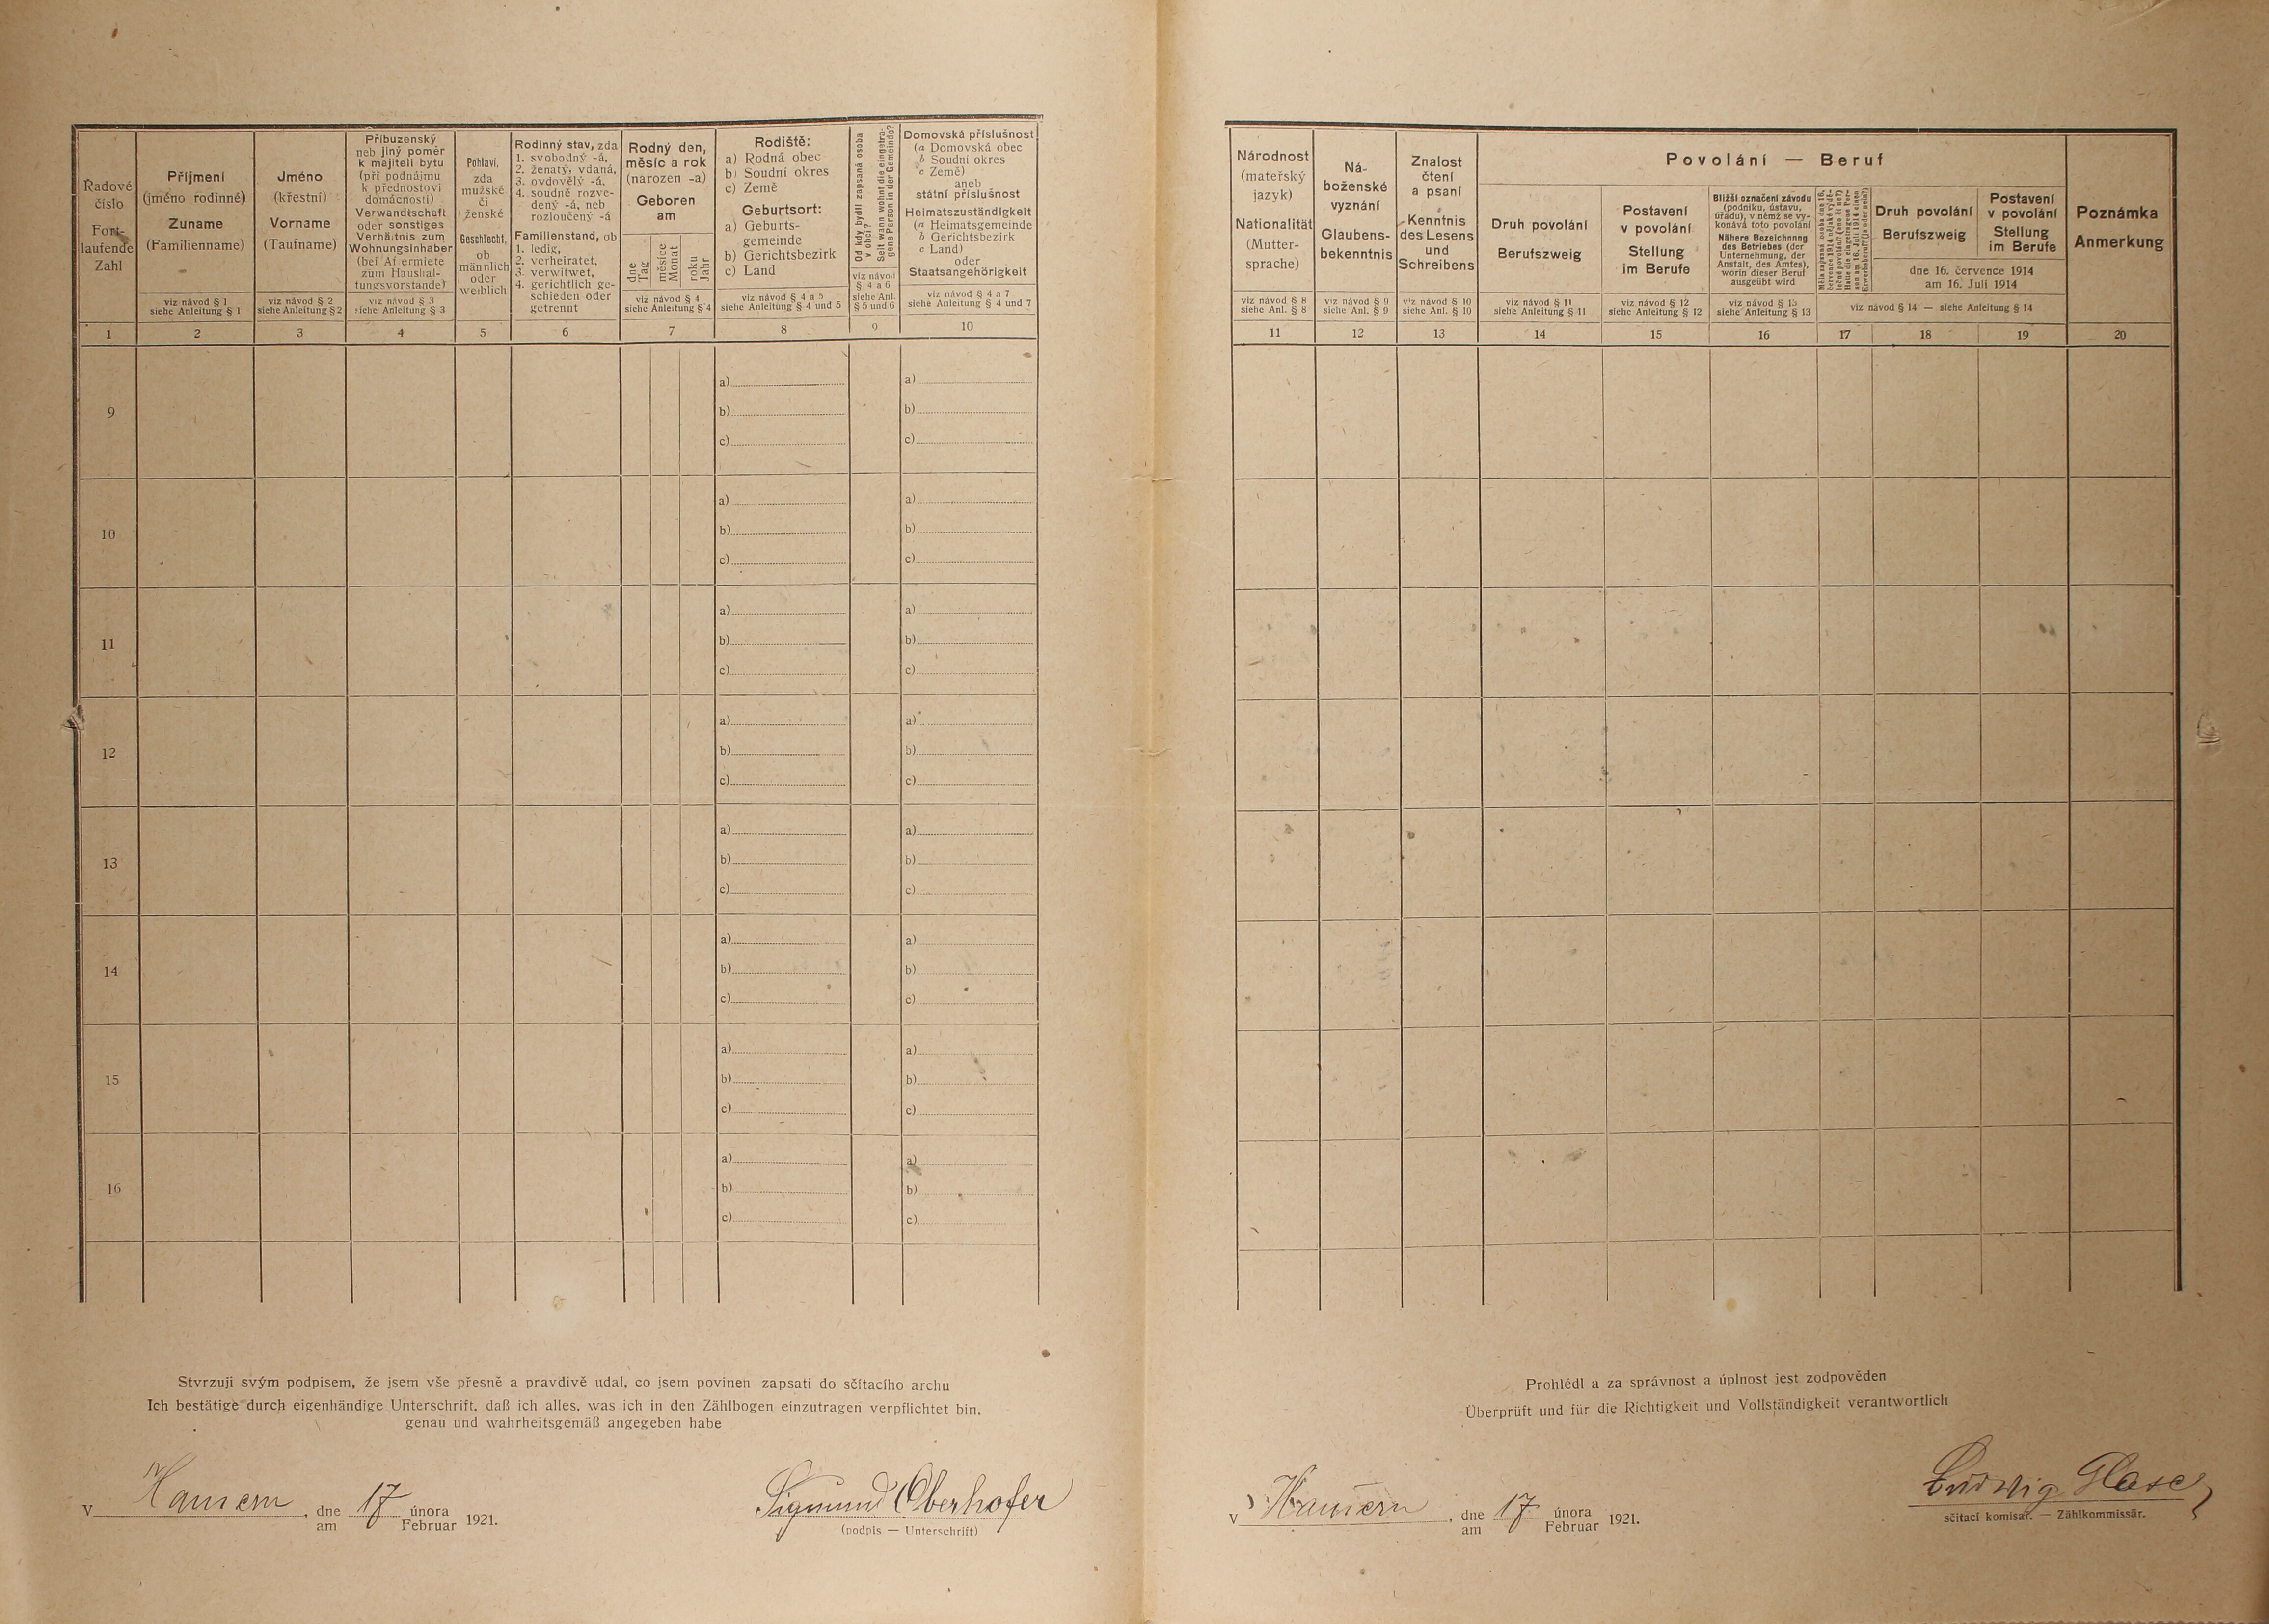 3. soap-kt_01159_census-1921-hamry-cp117_0030